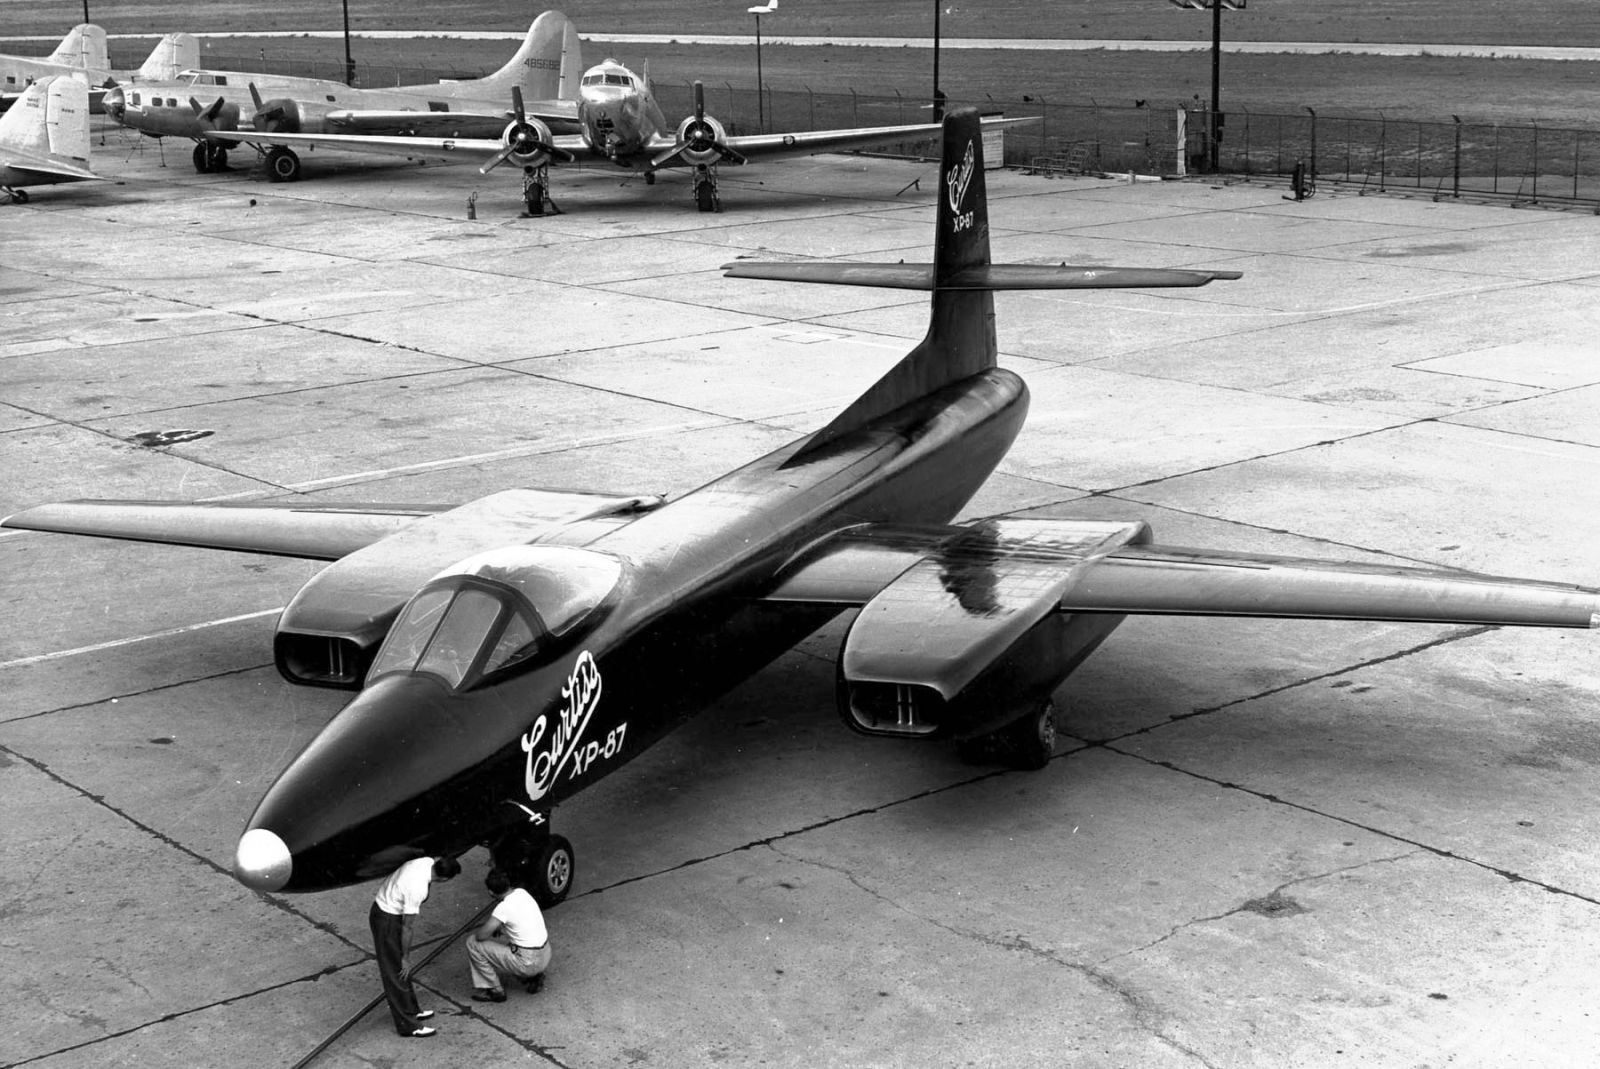 The XP-87 (later XF-87), likely photographed at the Curtiss factory in St. Louis. The size of Blackhawk is evident when compared to the two men examining the front wheel. A B-17 and DC-3 are visible in the background. (US Air Force)